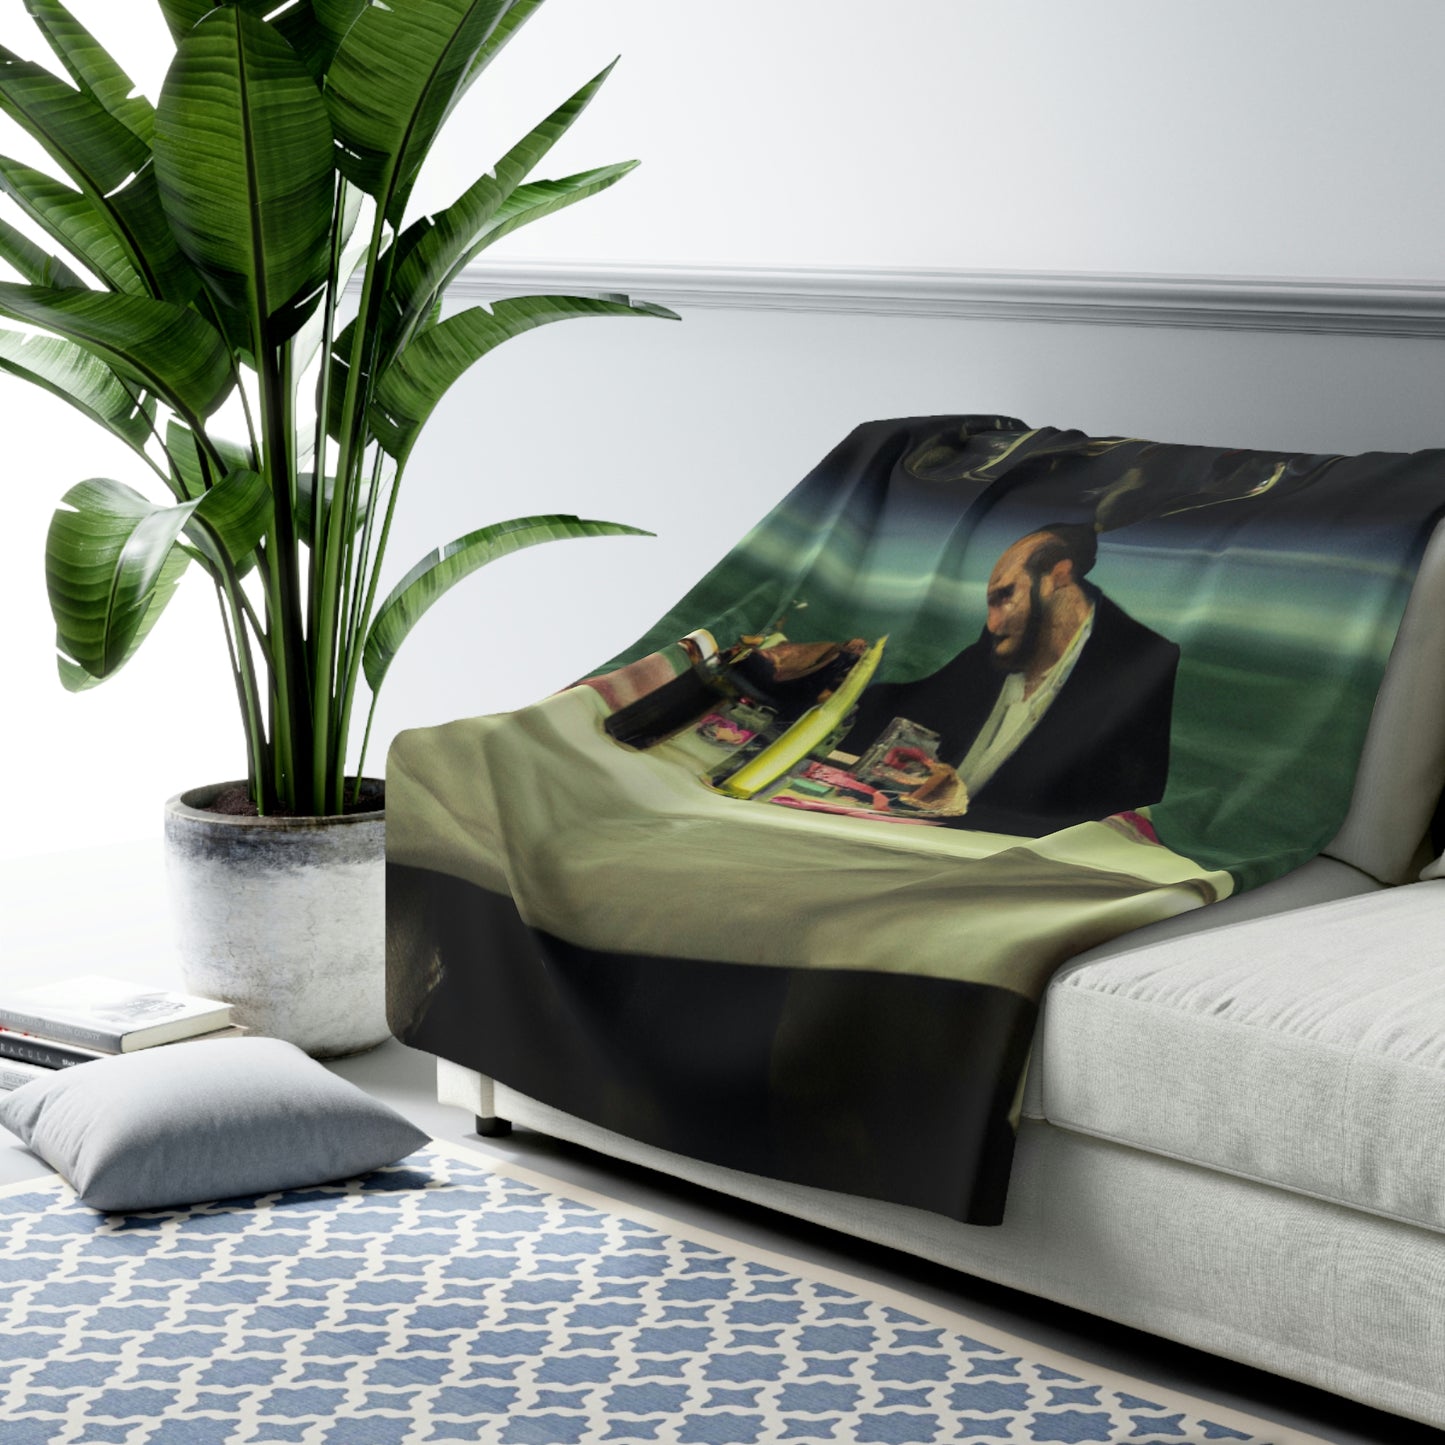 "A Beacon of Romance: An Intimate Candlelit Dinner in a Forgotten Lighthouse" - The Alien Sherpa Fleece Blanket